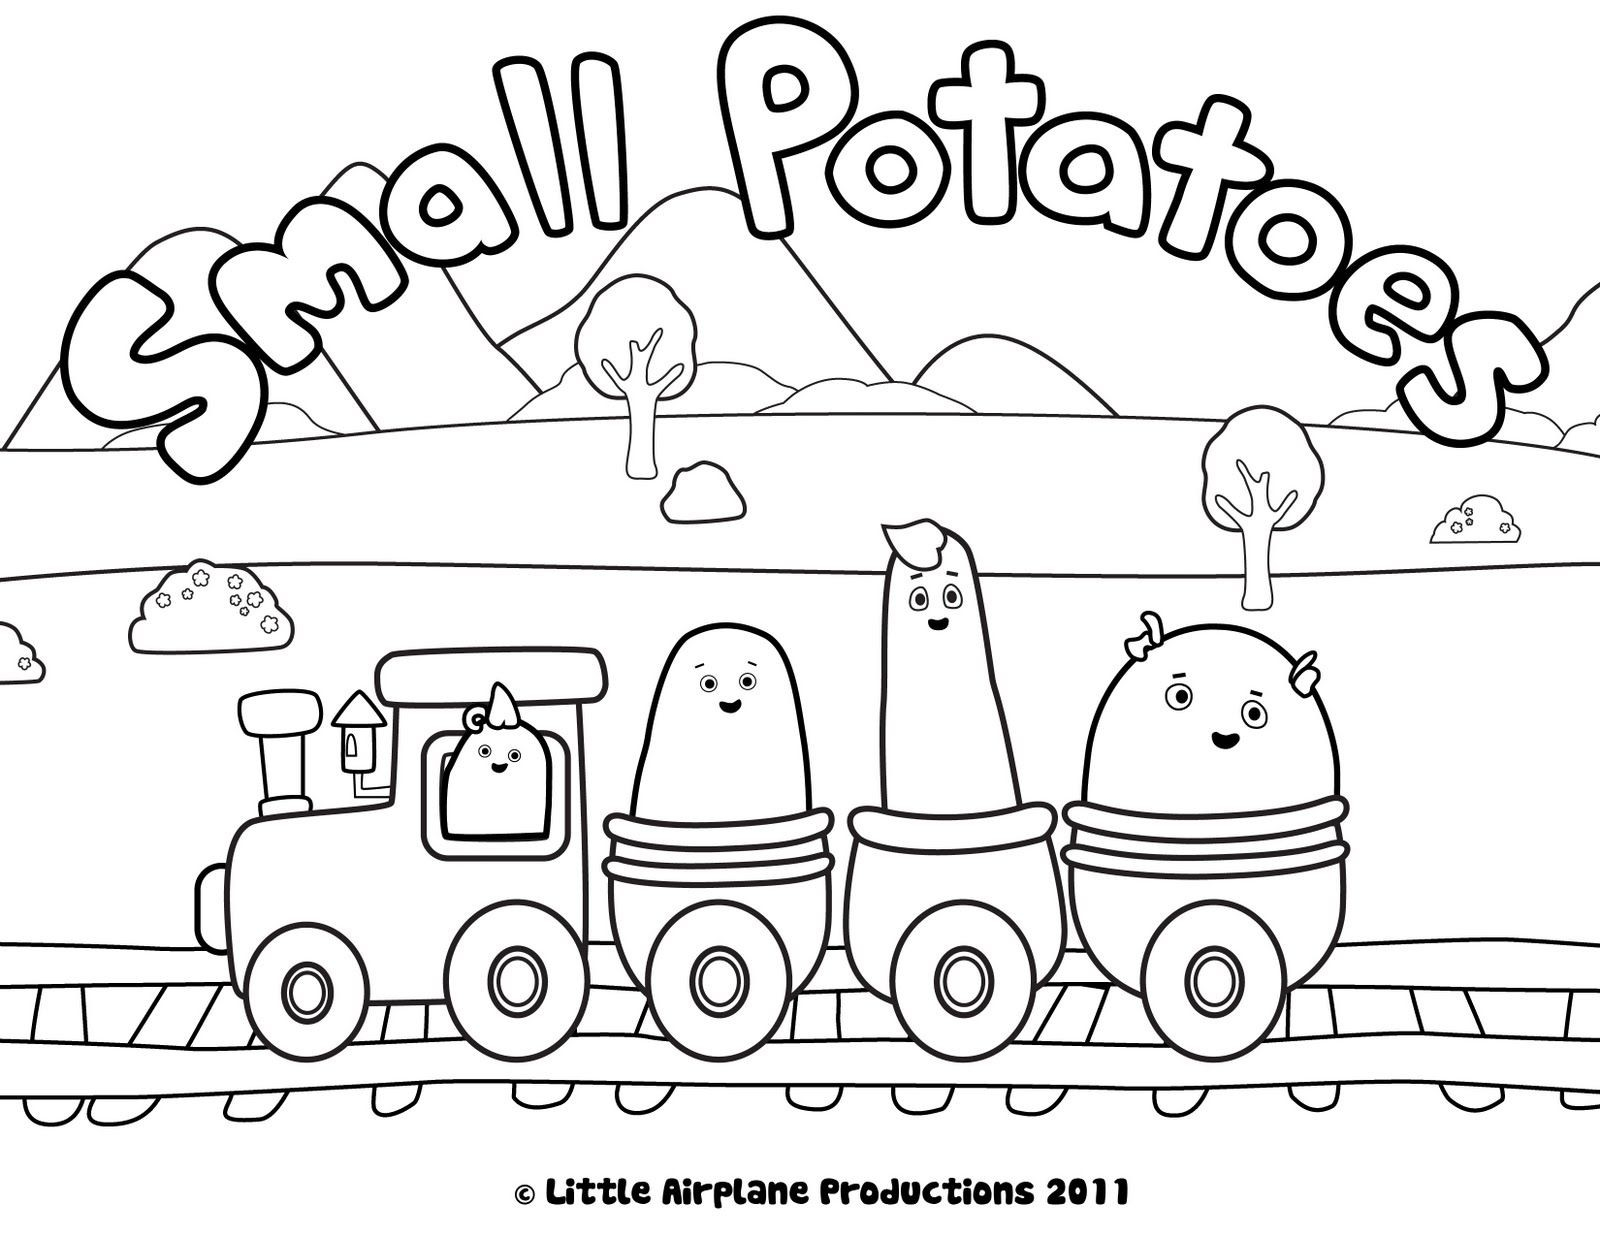 Potato Coloring Page Potato 9 Coloring Page 20 Potato Coloring Pages Lrcp